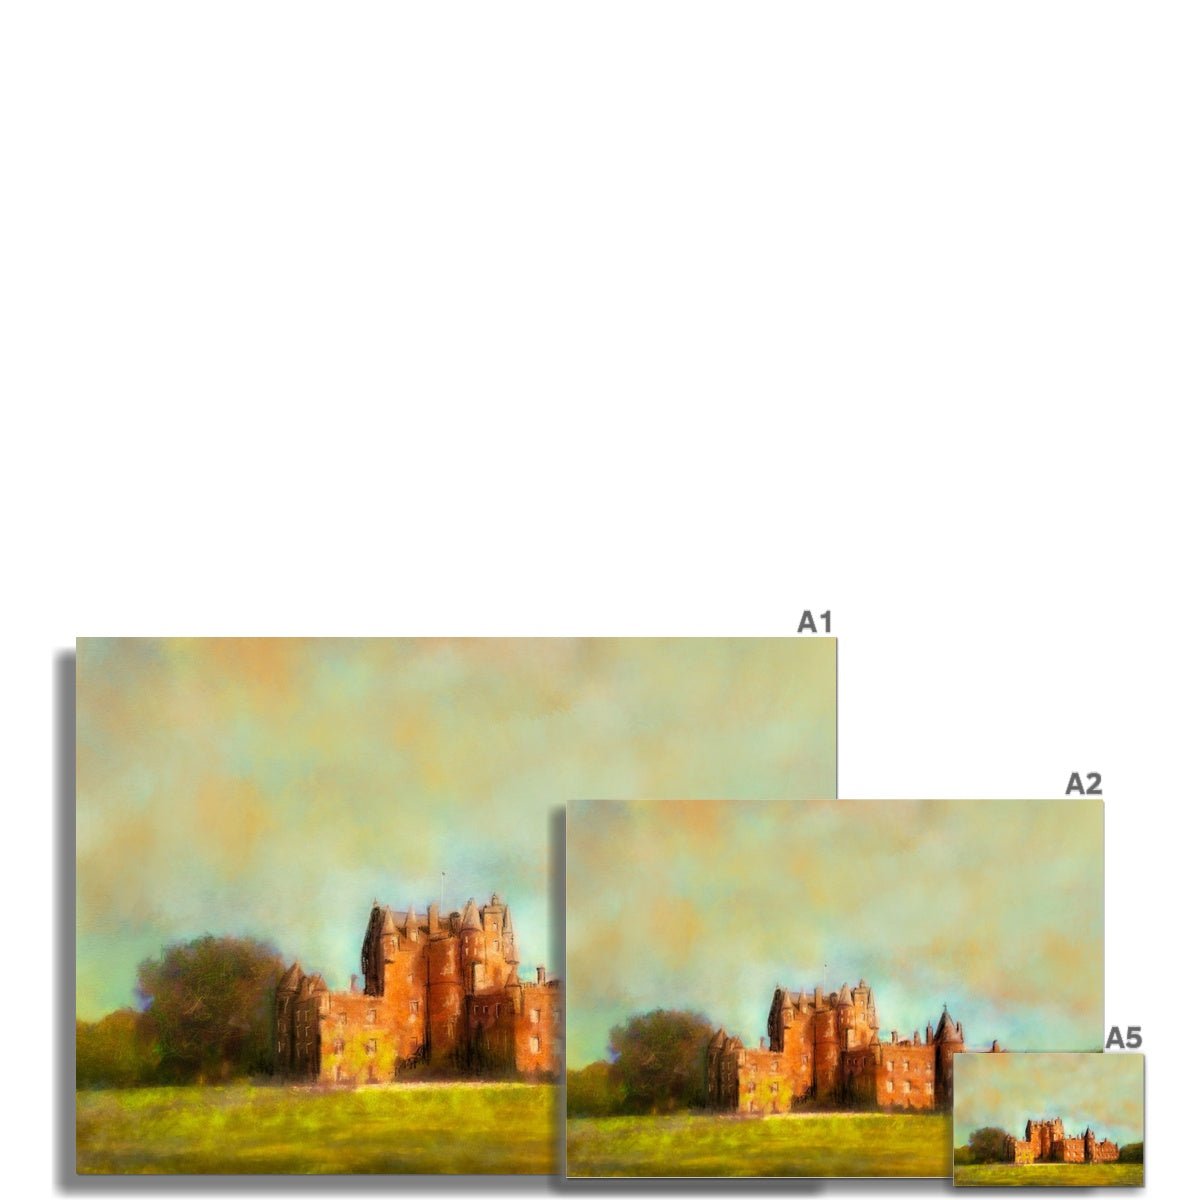 Glamis Castle Painting | Fine Art Prints From Scotland-Unframed Prints-Historic & Iconic Scotland Art Gallery-Paintings, Prints, Homeware, Art Gifts From Scotland By Scottish Artist Kevin Hunter